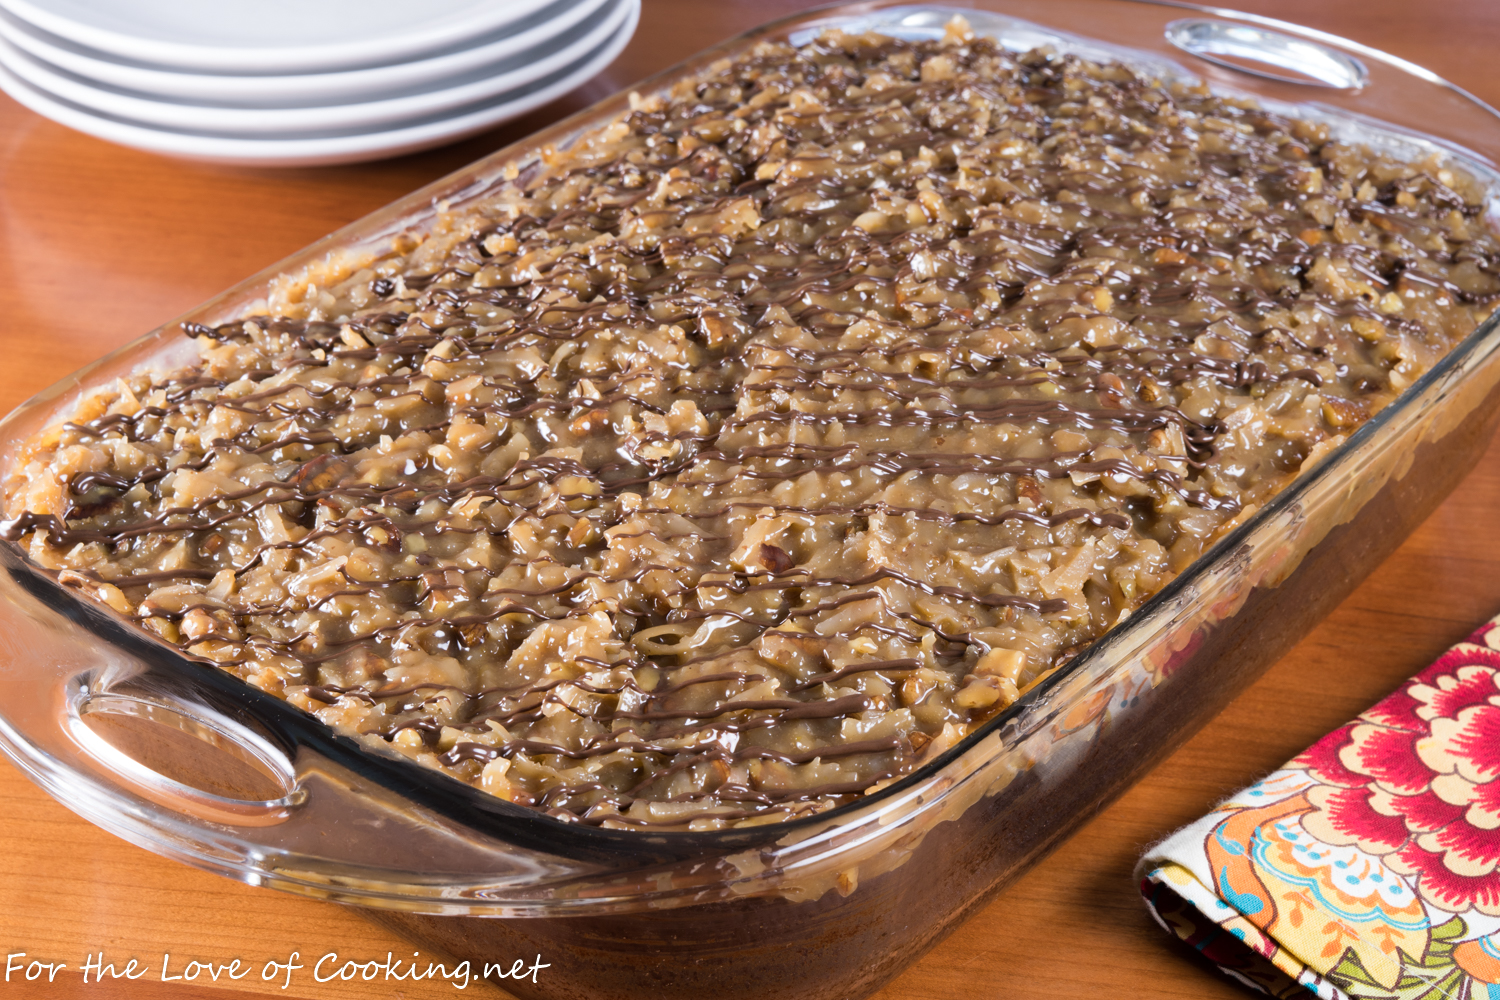 German Chocolate Snack Cake with Coconut-Pecan Frosting